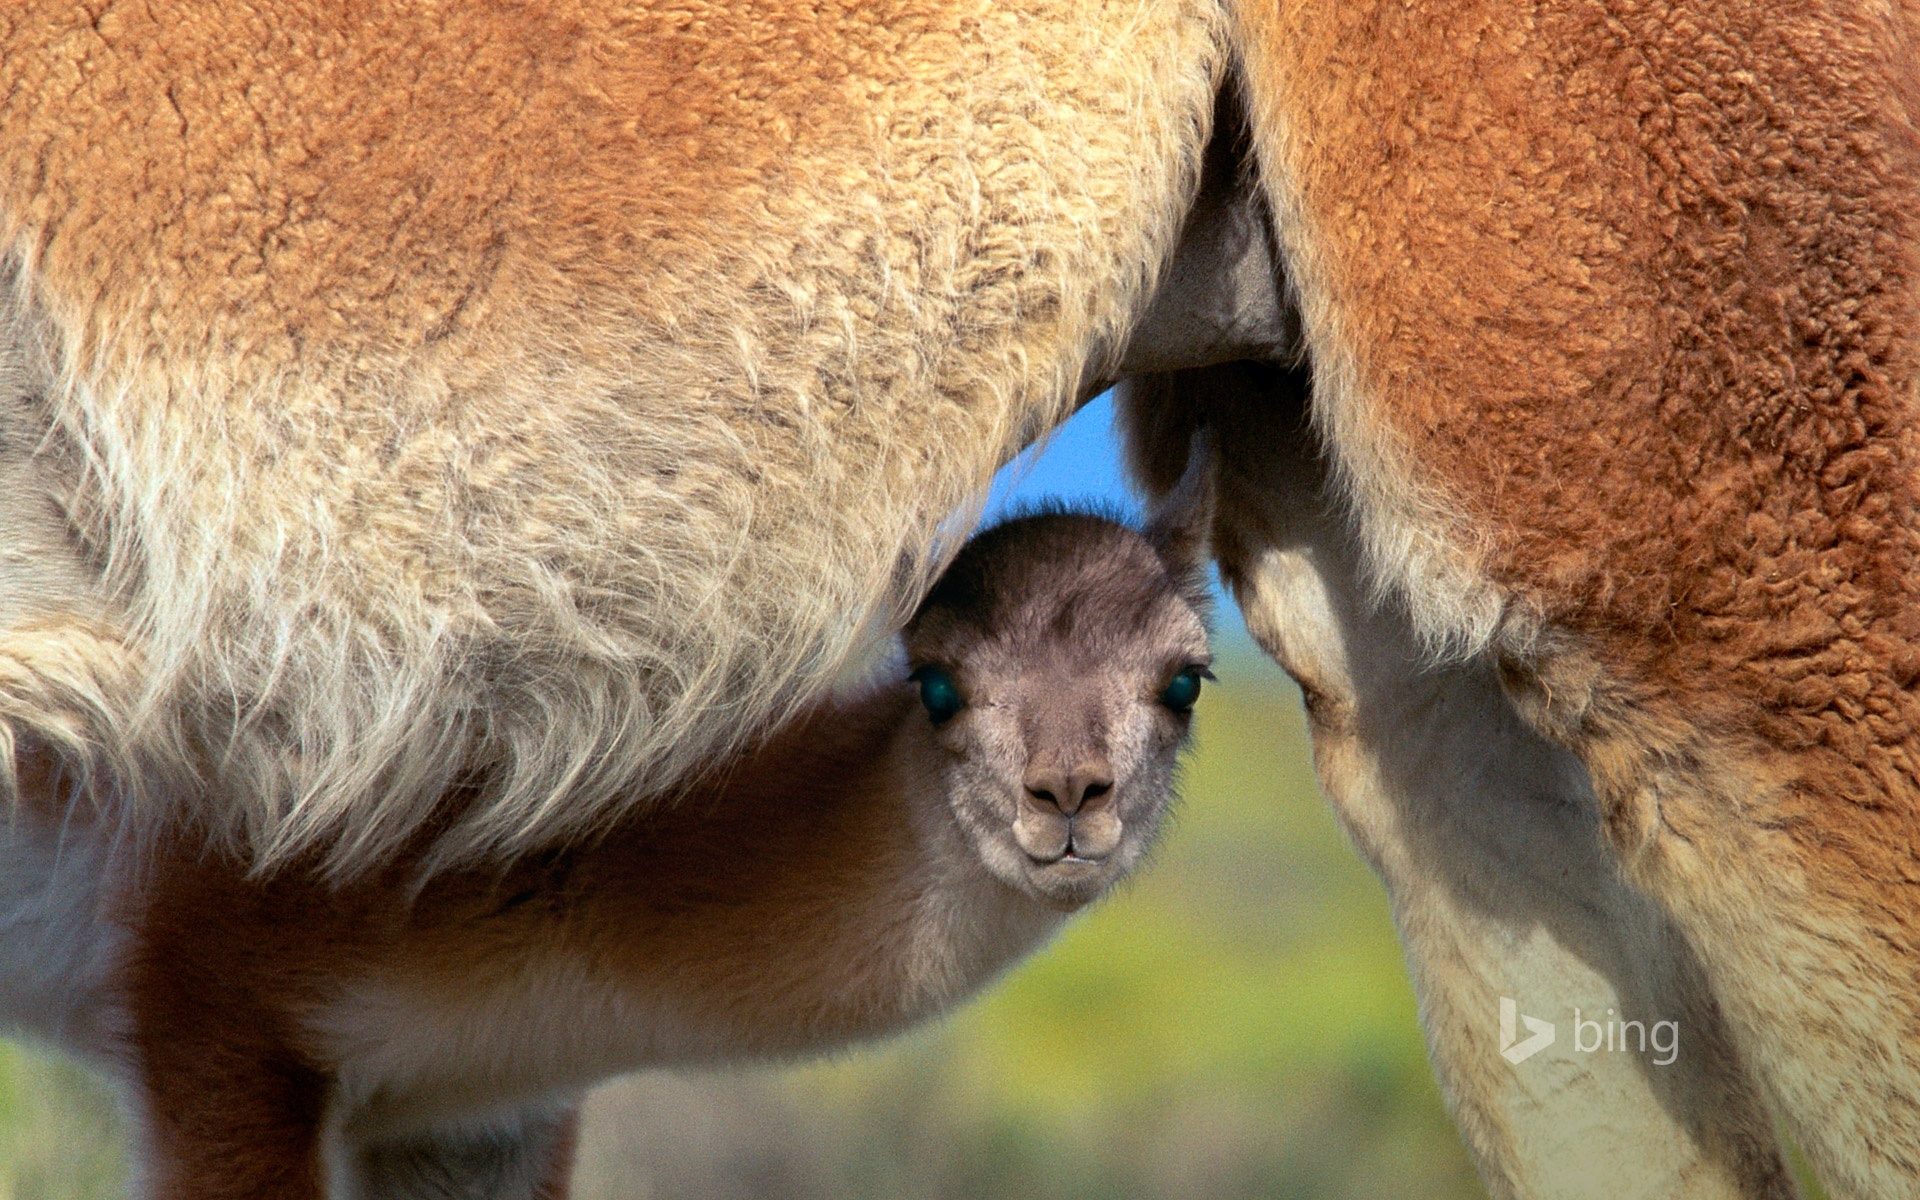 Young guanaco seeking safety under its mother, Torres del Paine National Park, Chile